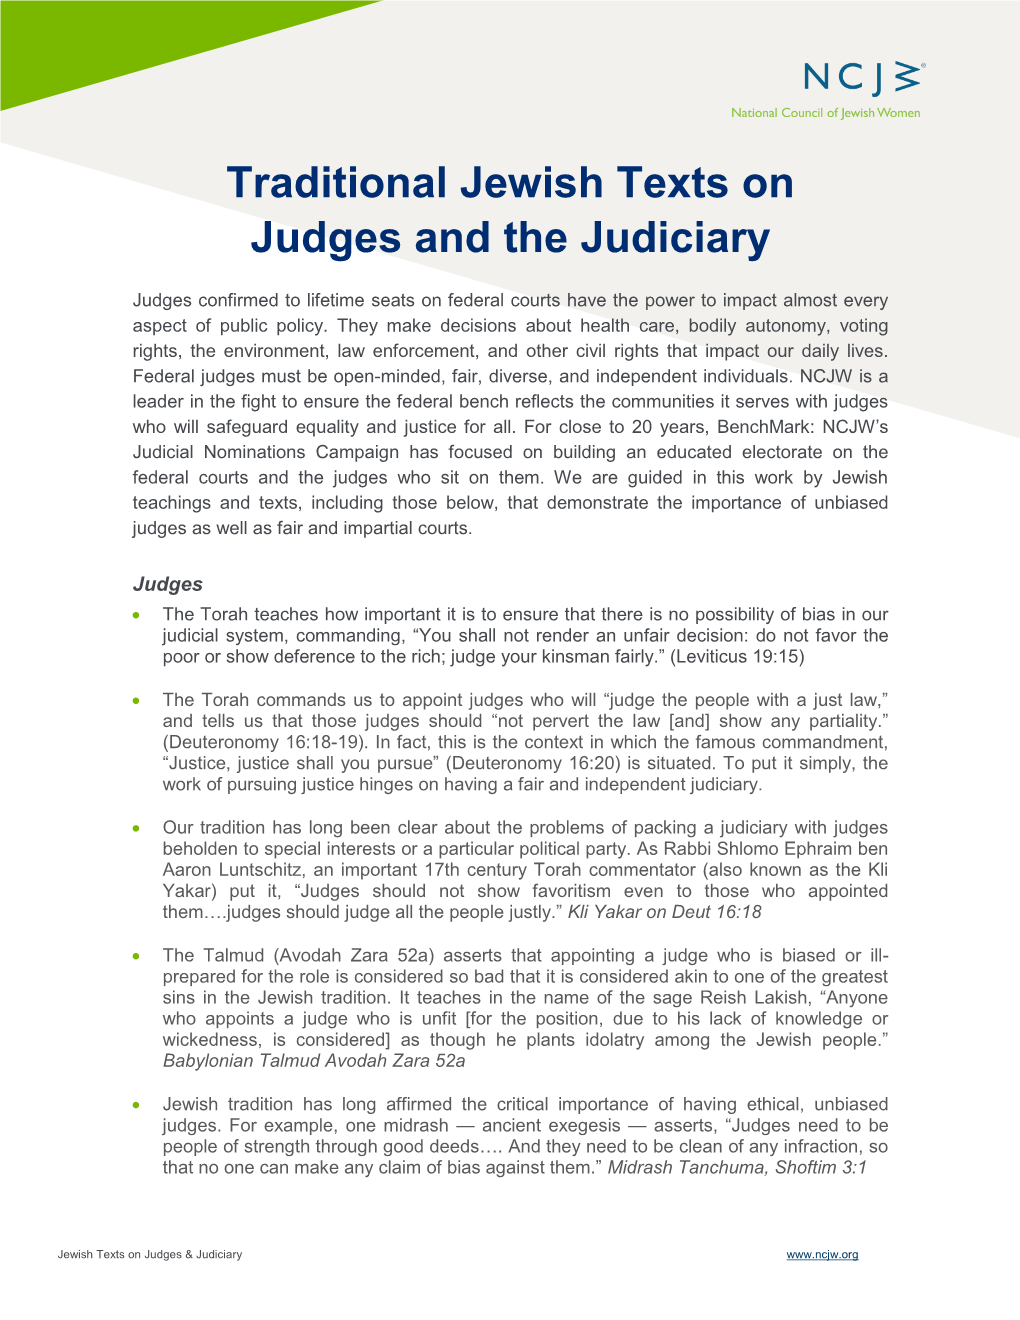 Traditional Jewish Texts on Judges and the Judiciary